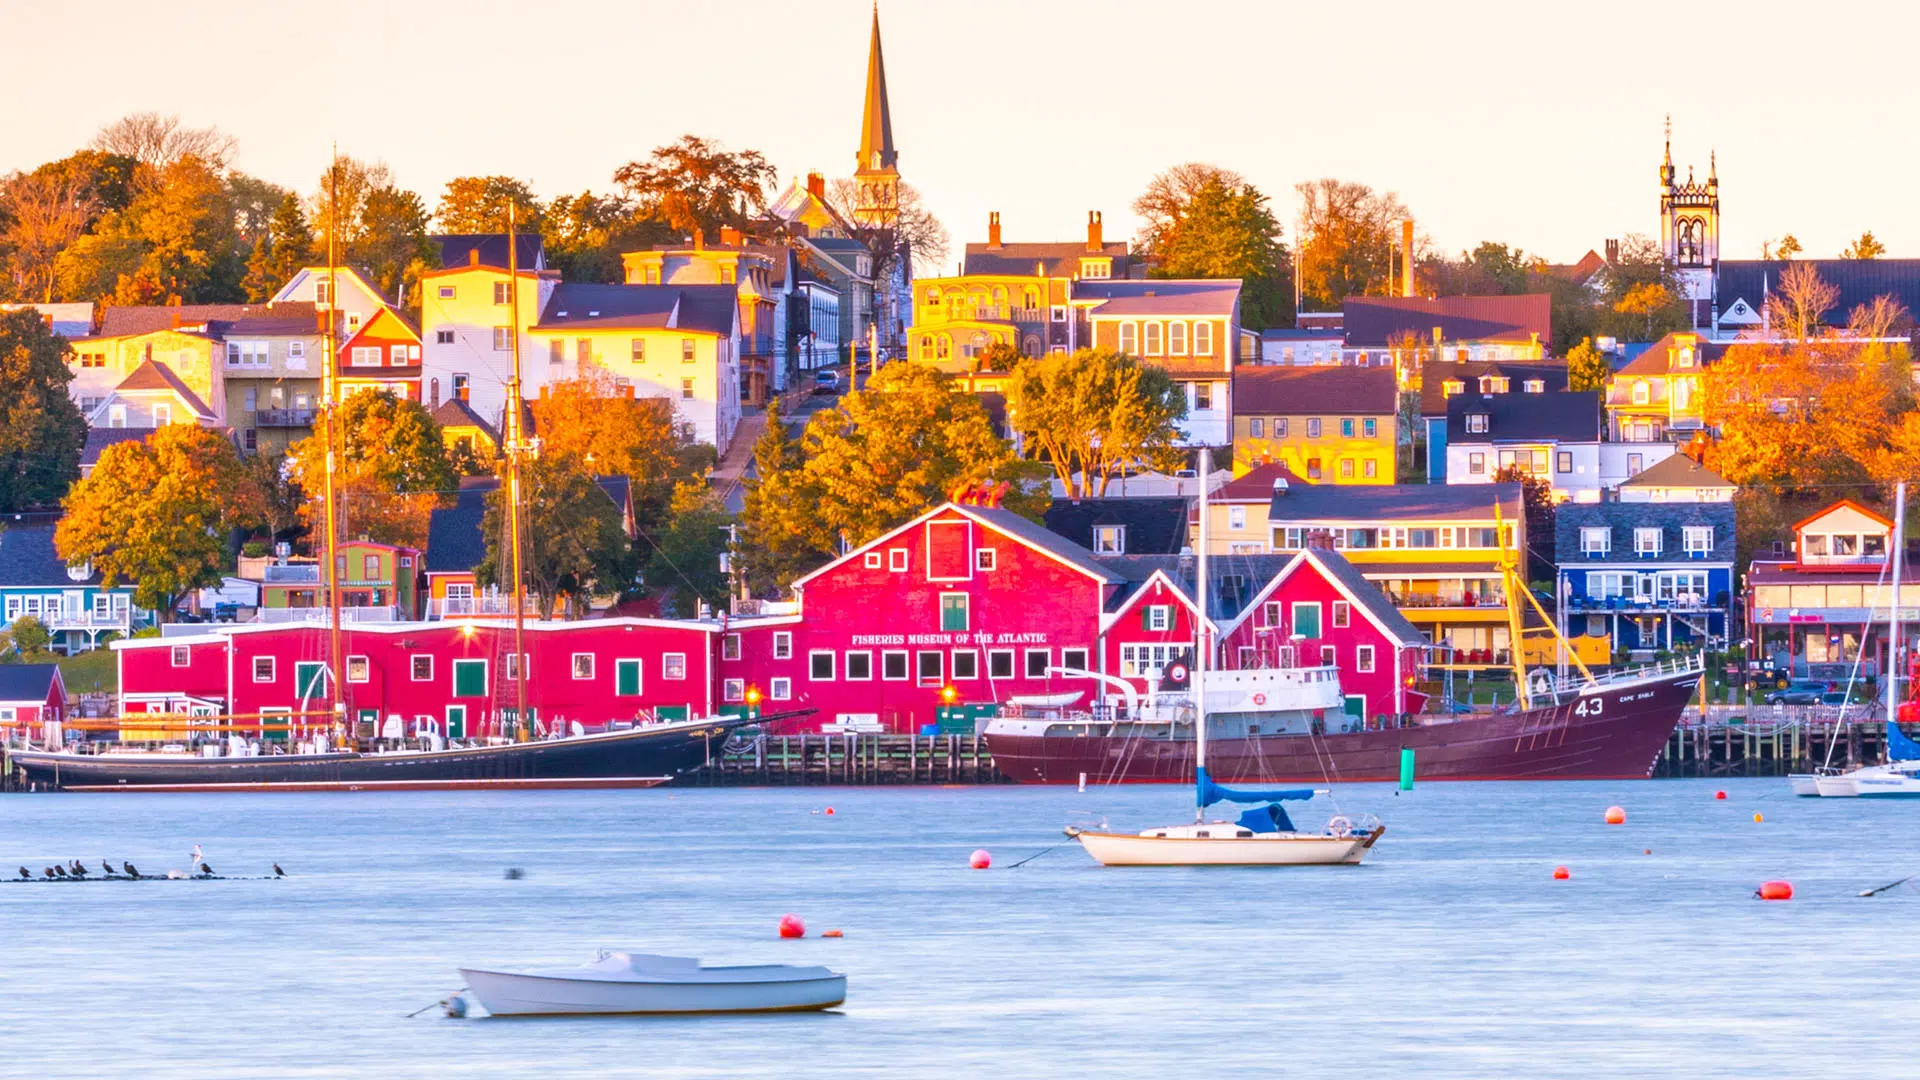 Lunenburg receives federal funding to enhance tourism offerings